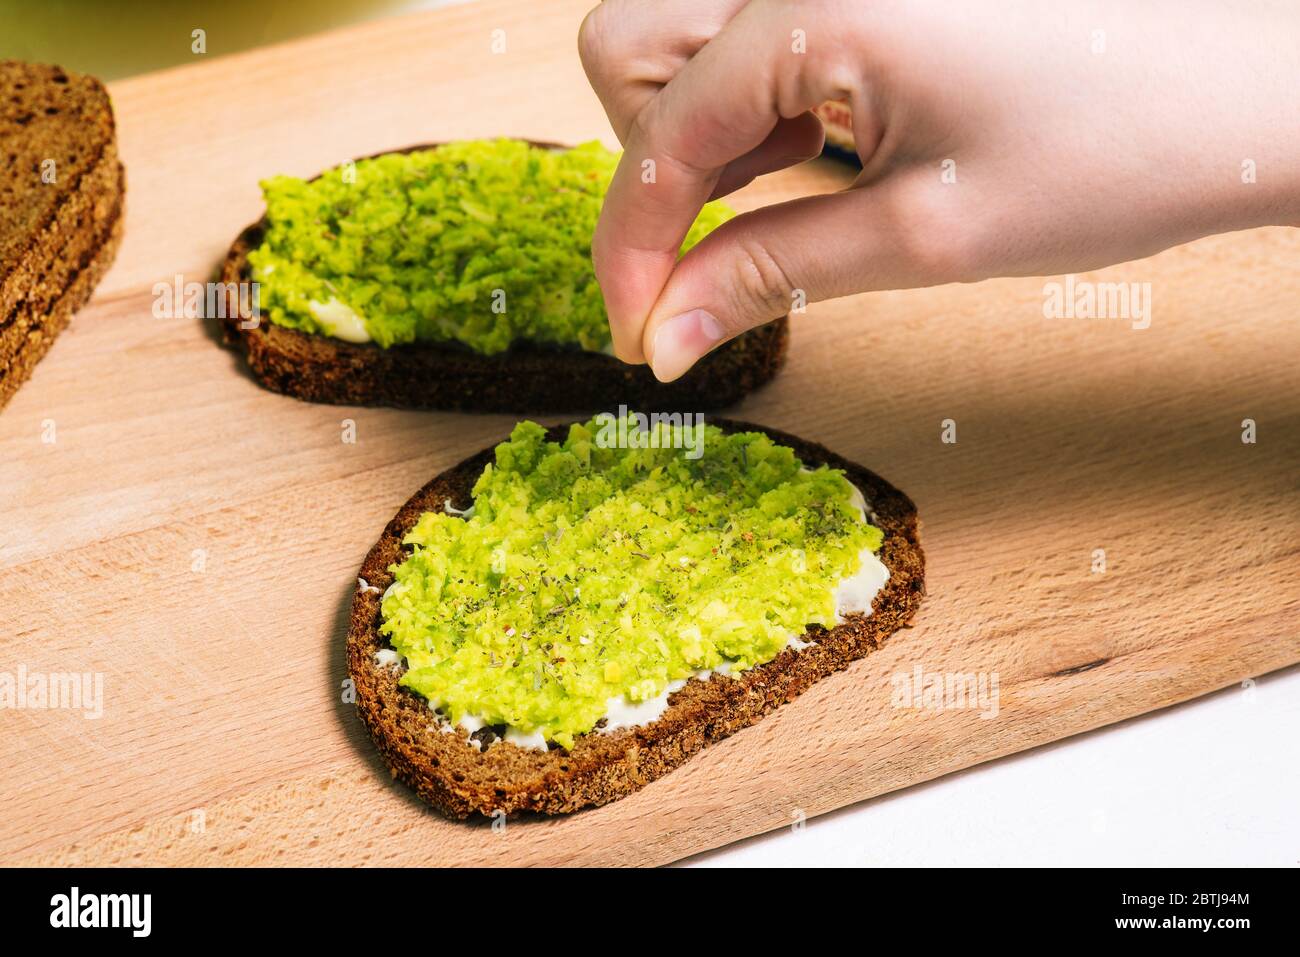 The cook sprinkles spices on a ready-made avocado sandwich. Healthy food for Breakfast, lunch or dinner. Vegetarian recipe Stock Photo